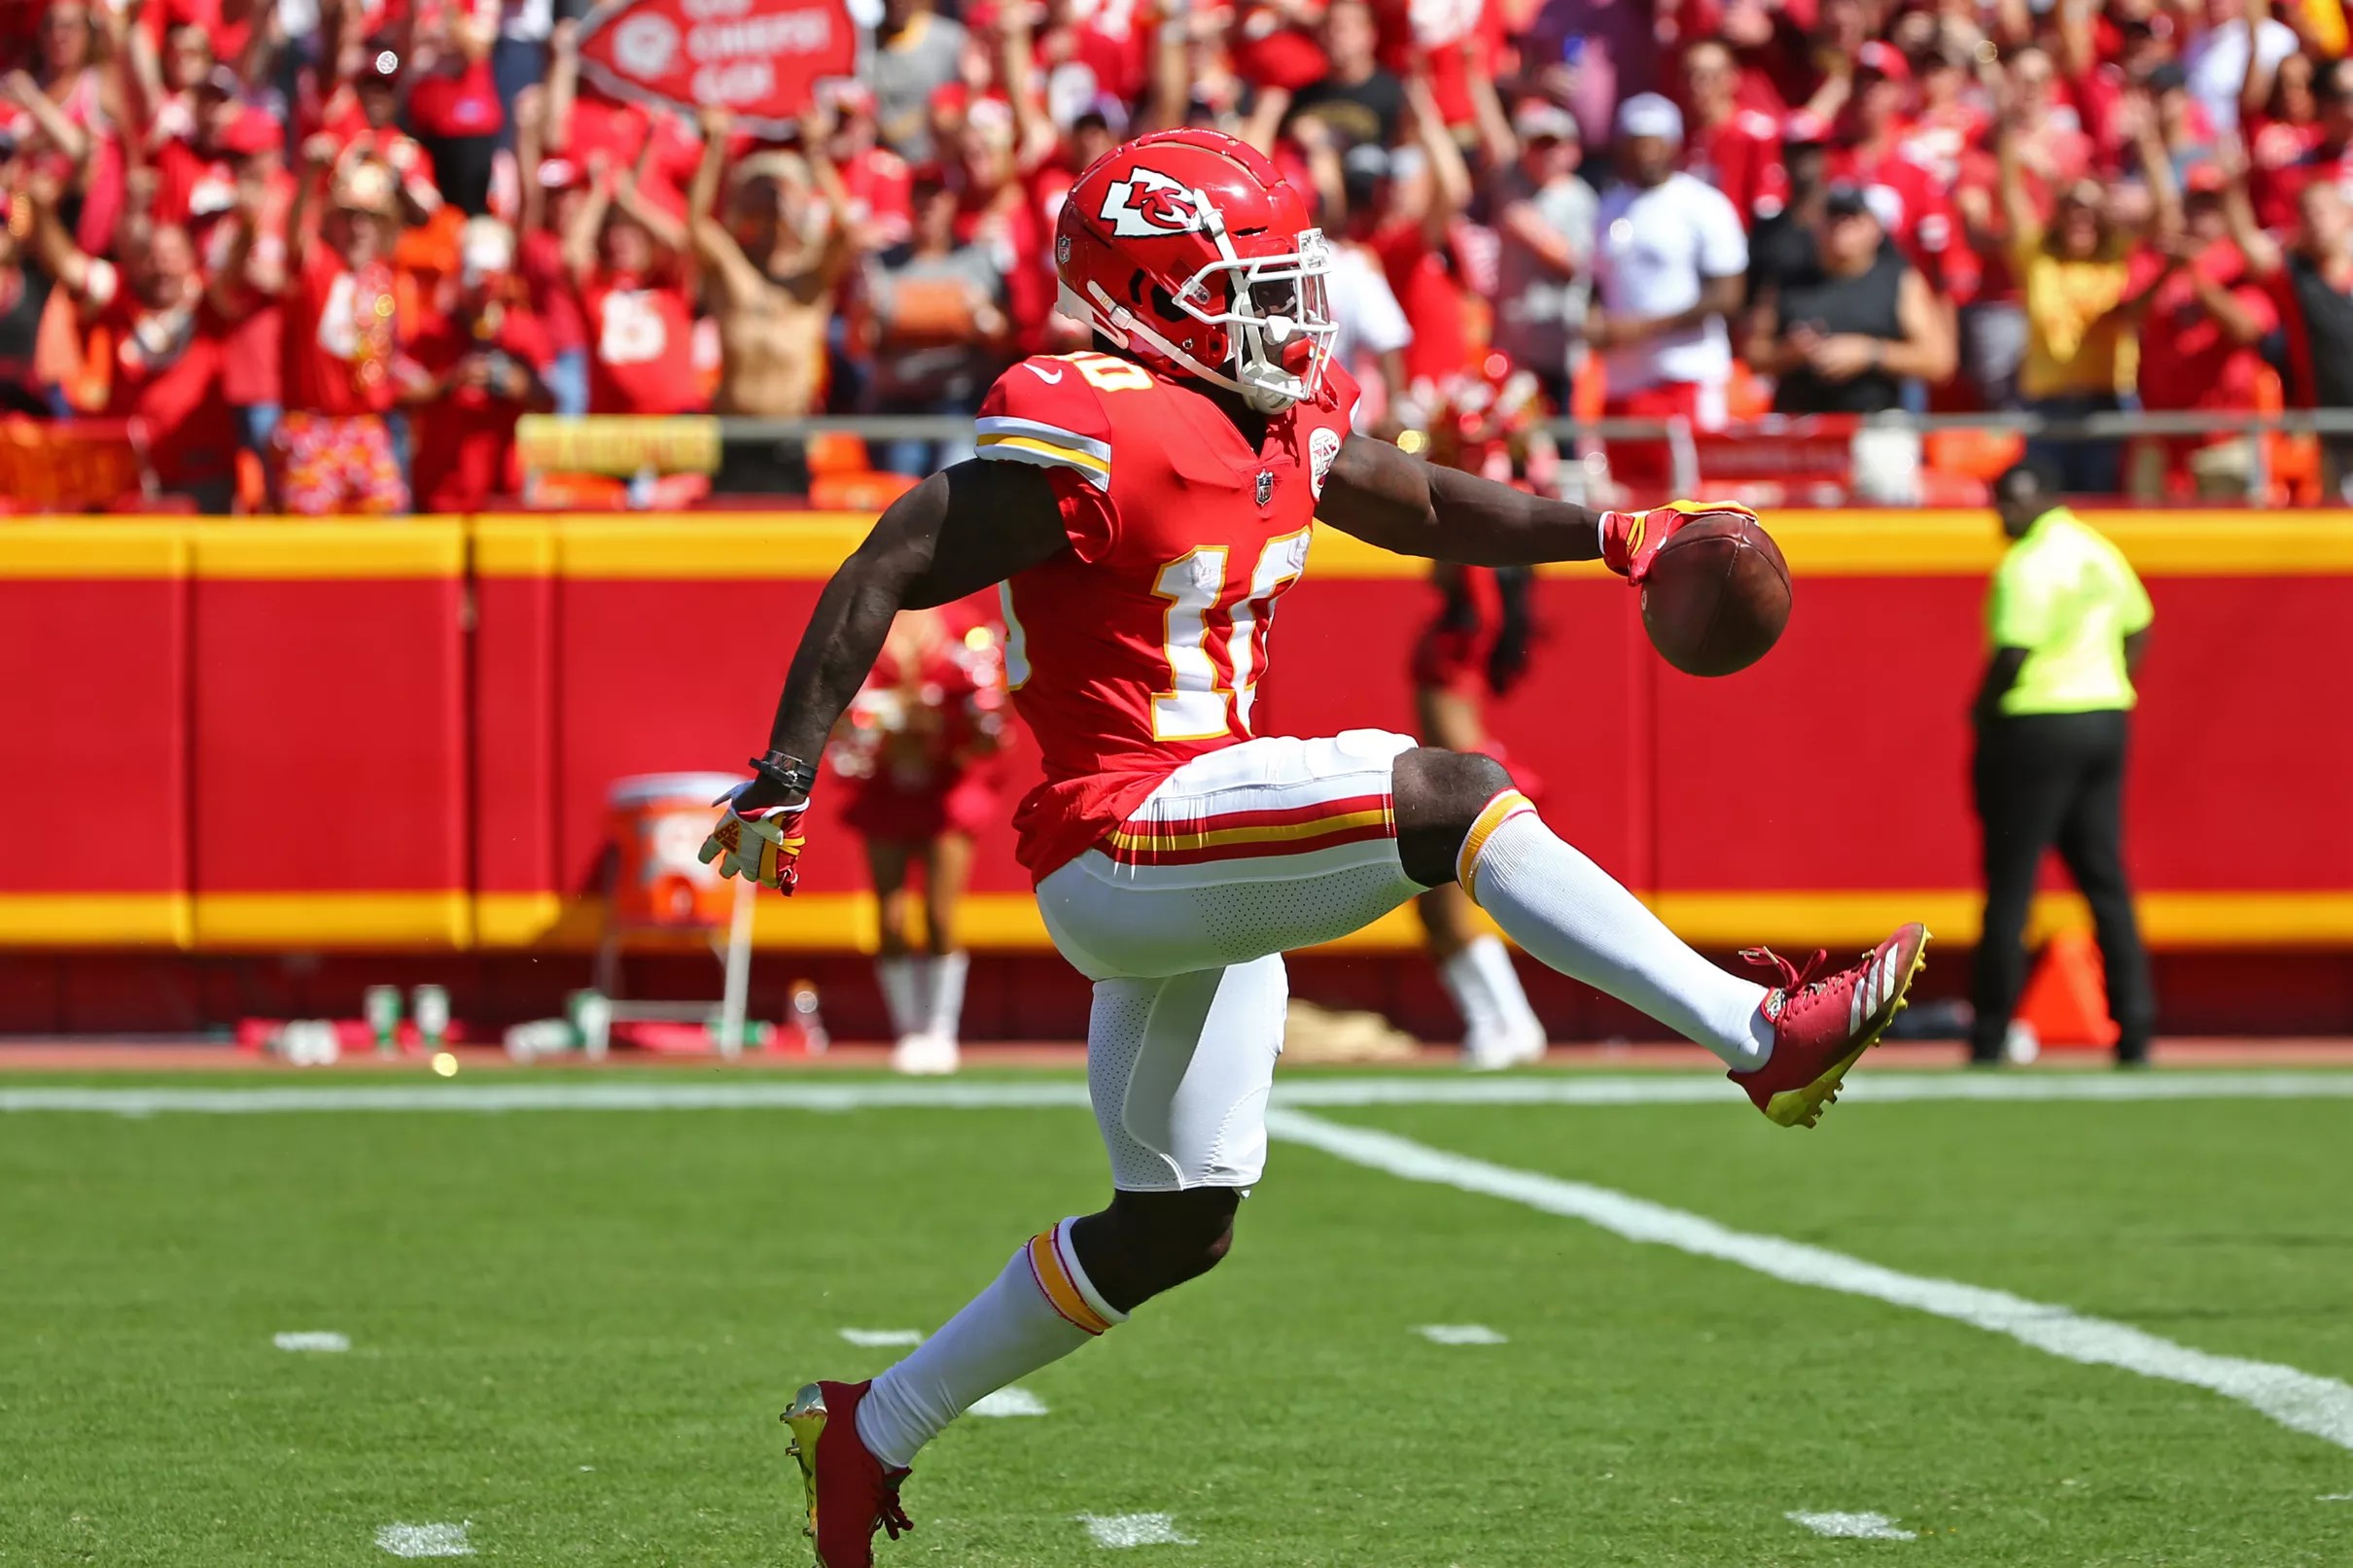 Arrowheadlines: Chiefs have the “most dangerous receiver in the NFL”